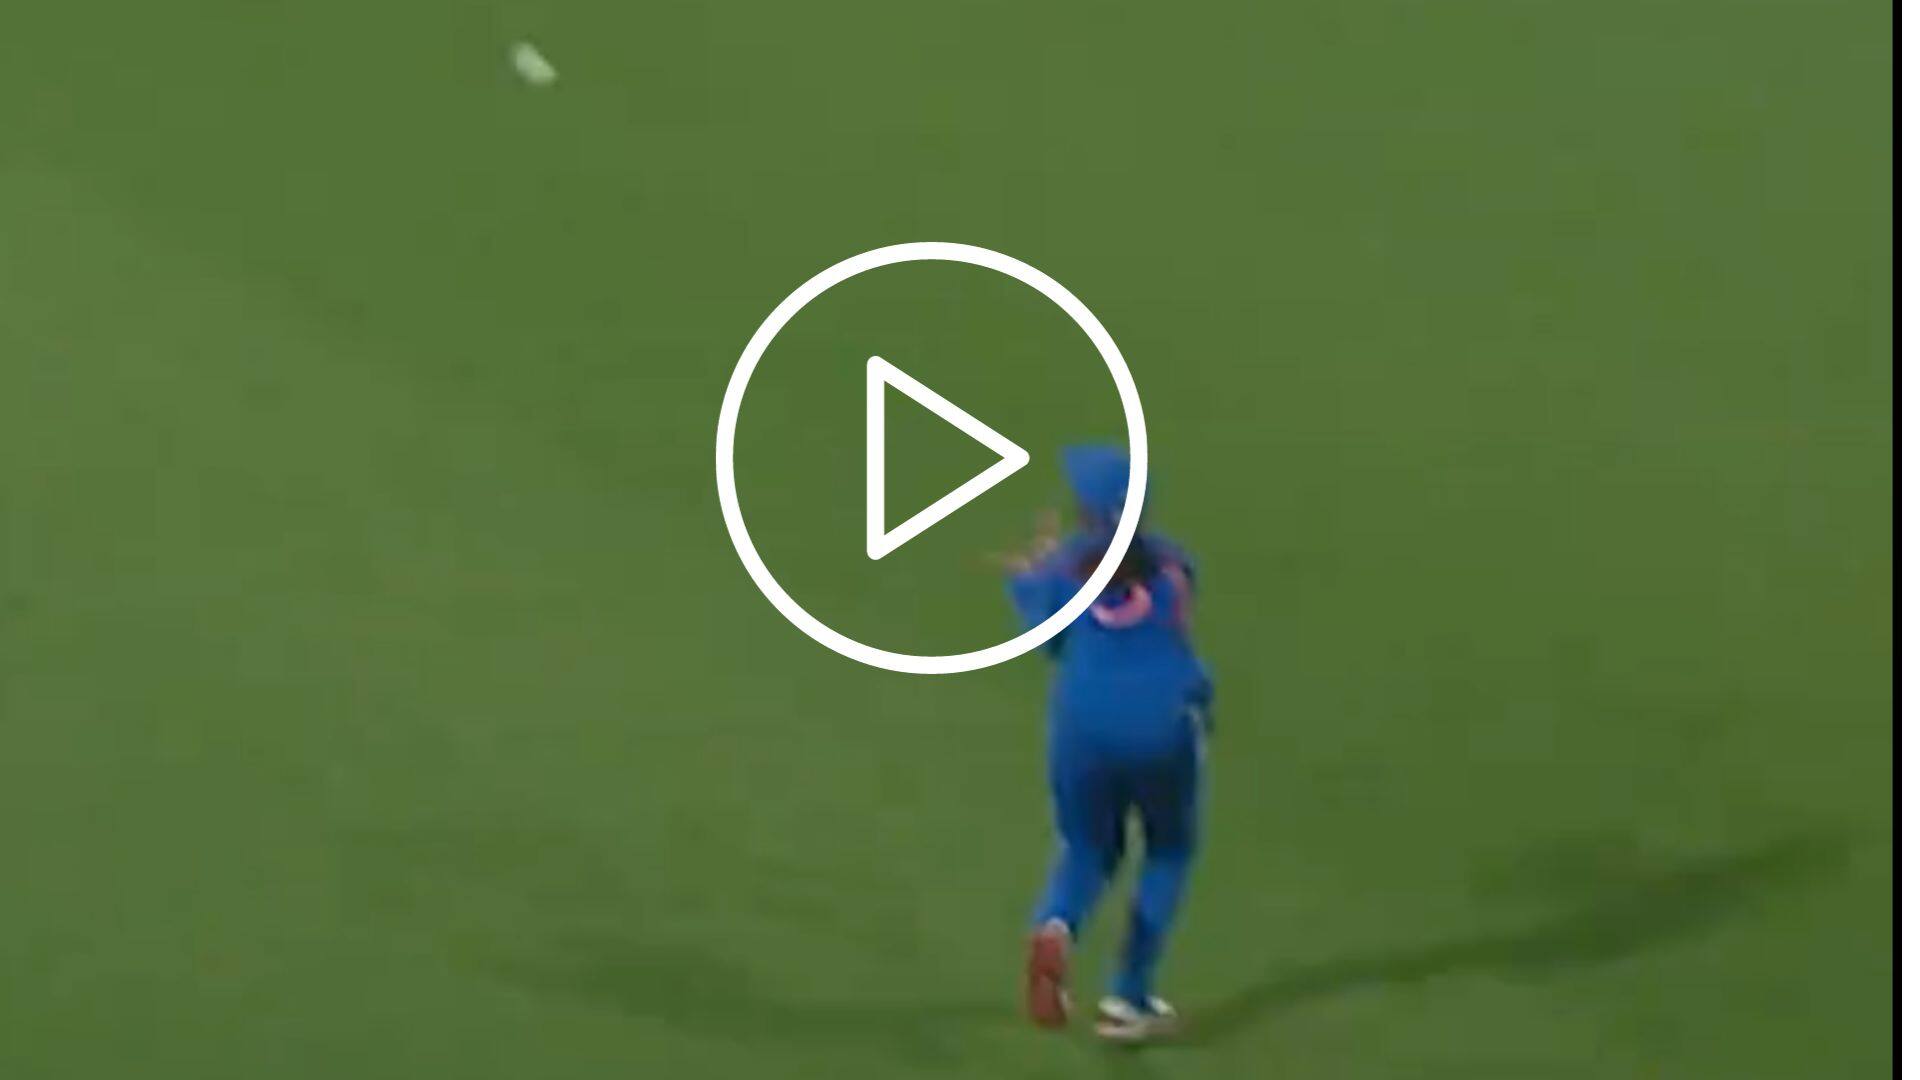 [Watch] RCB's Shreyanka Patil's 'Flying Catch' Sends Aussie Captain Back In The Hut